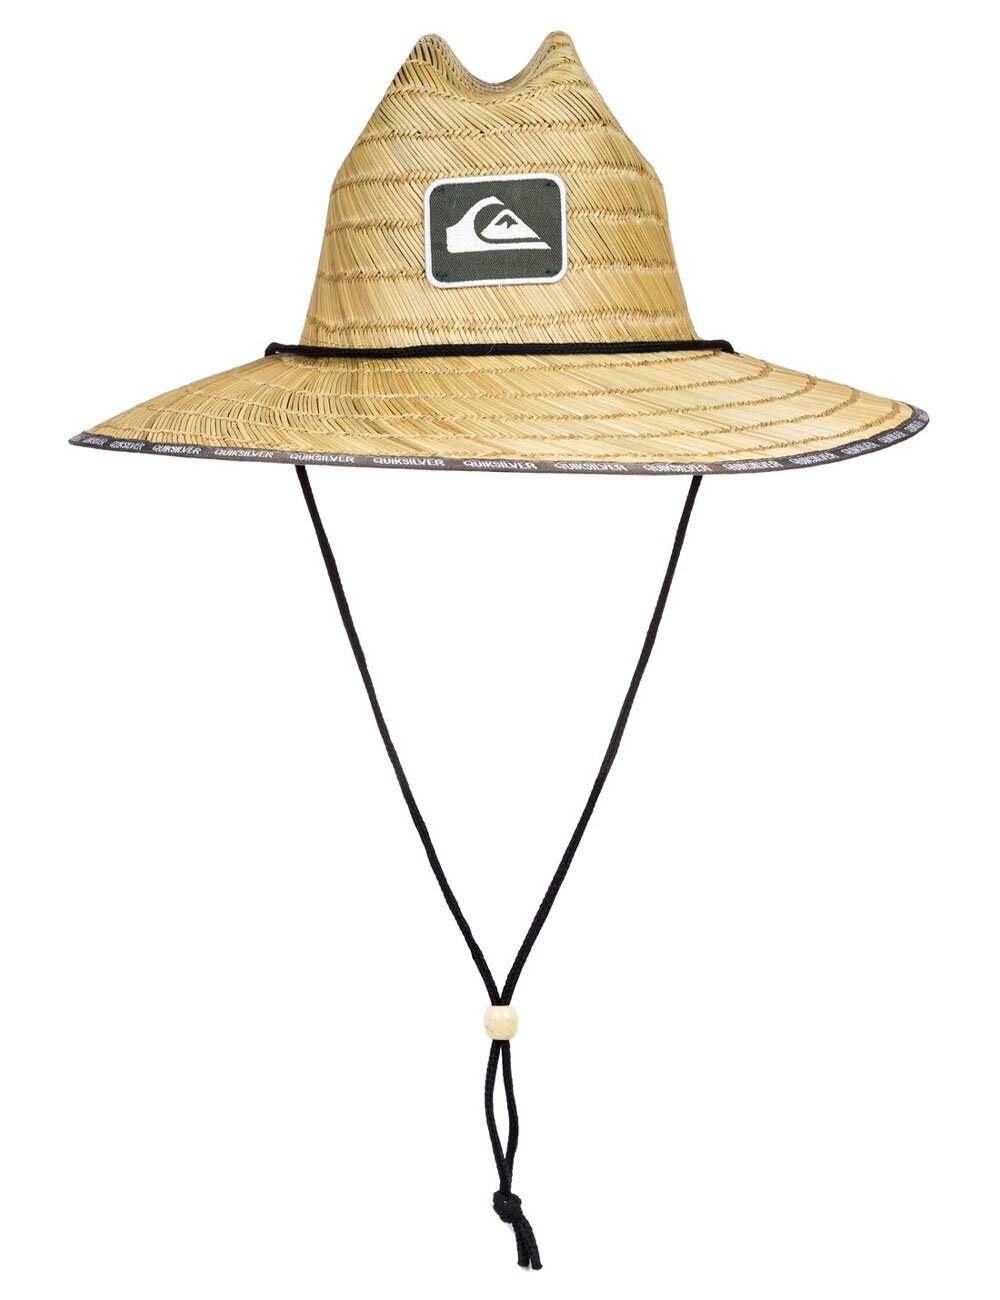 DREDGED STRAW HAT - Men's Accessories - Shop Sunnies, Hats, Bags & More ...